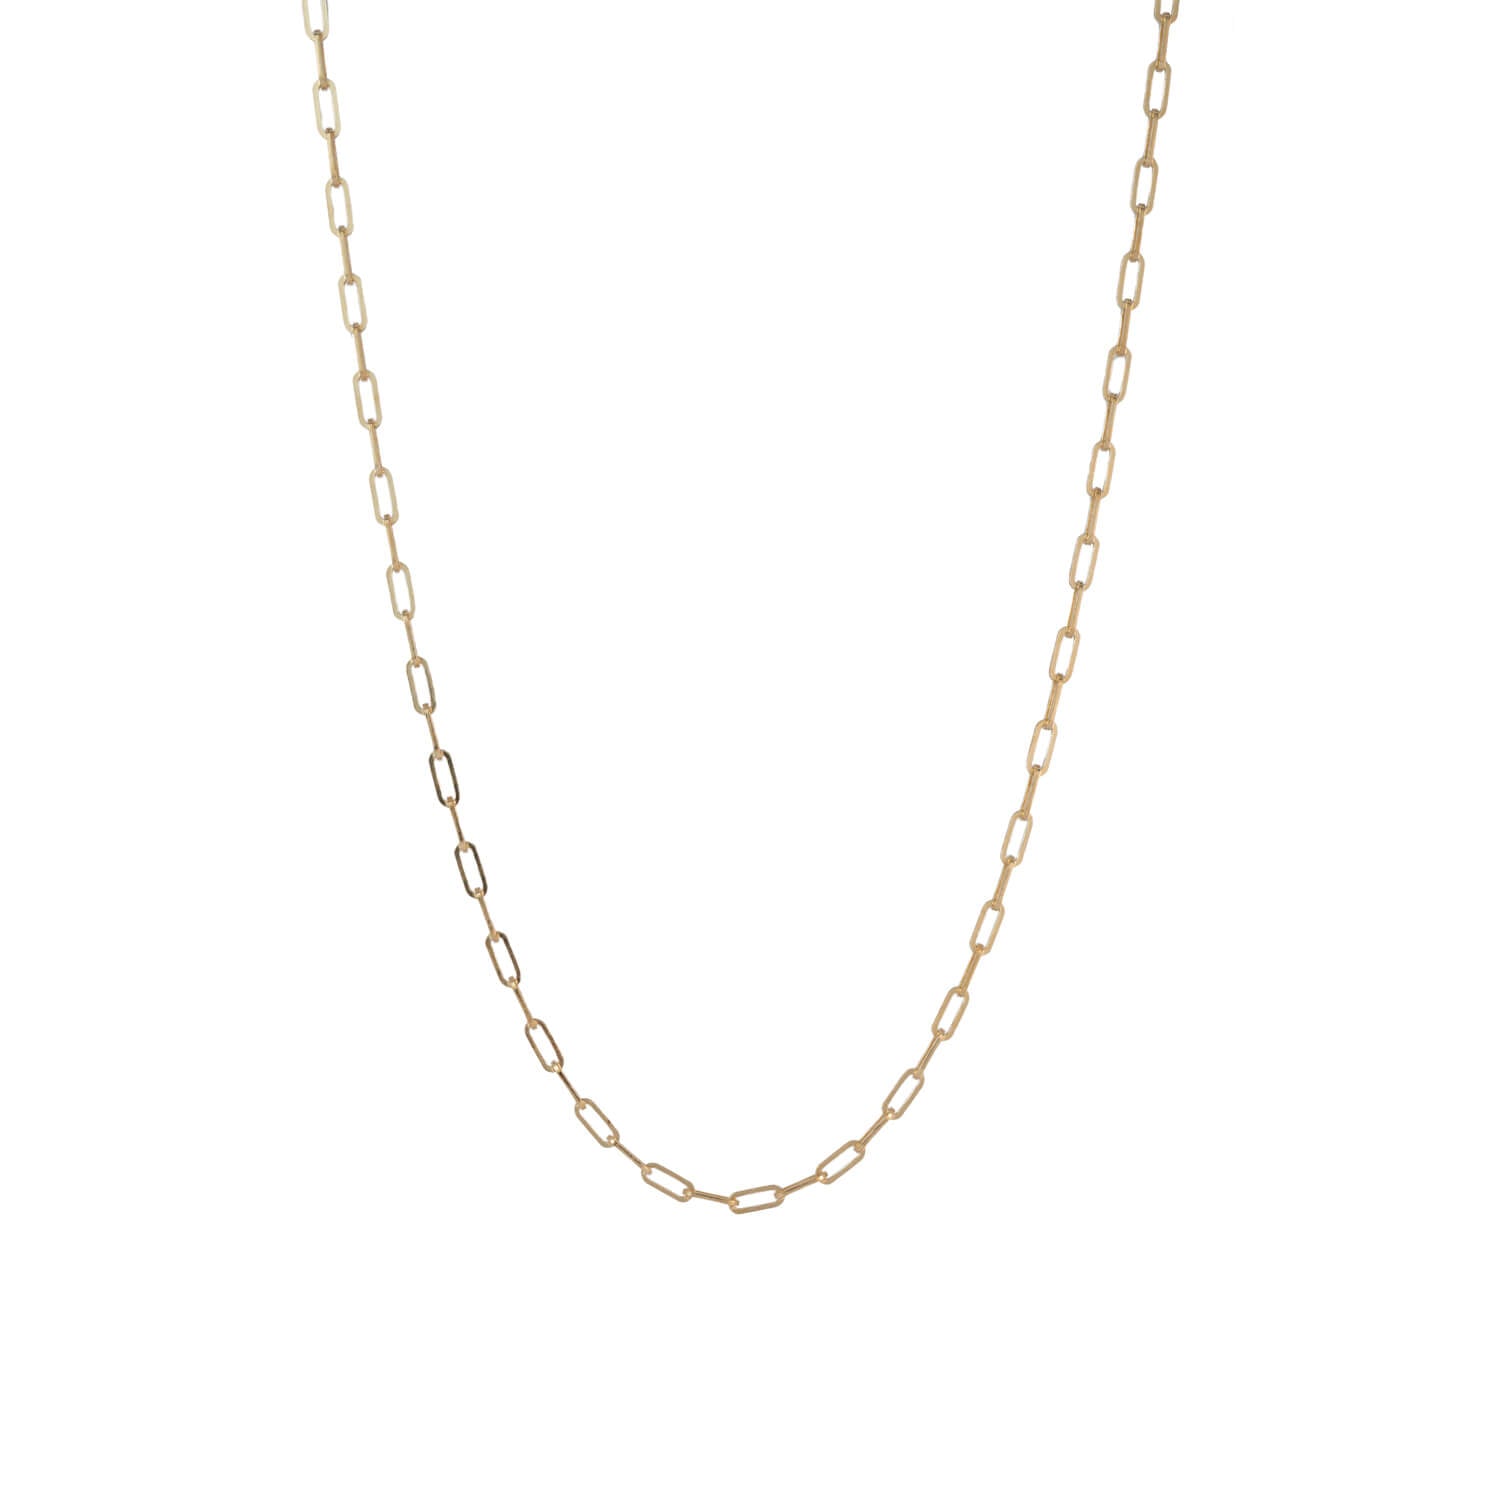 886 Royal Mint Necklaces 16 inch 886 Square Trace Chain in 9ct Yellow Gold